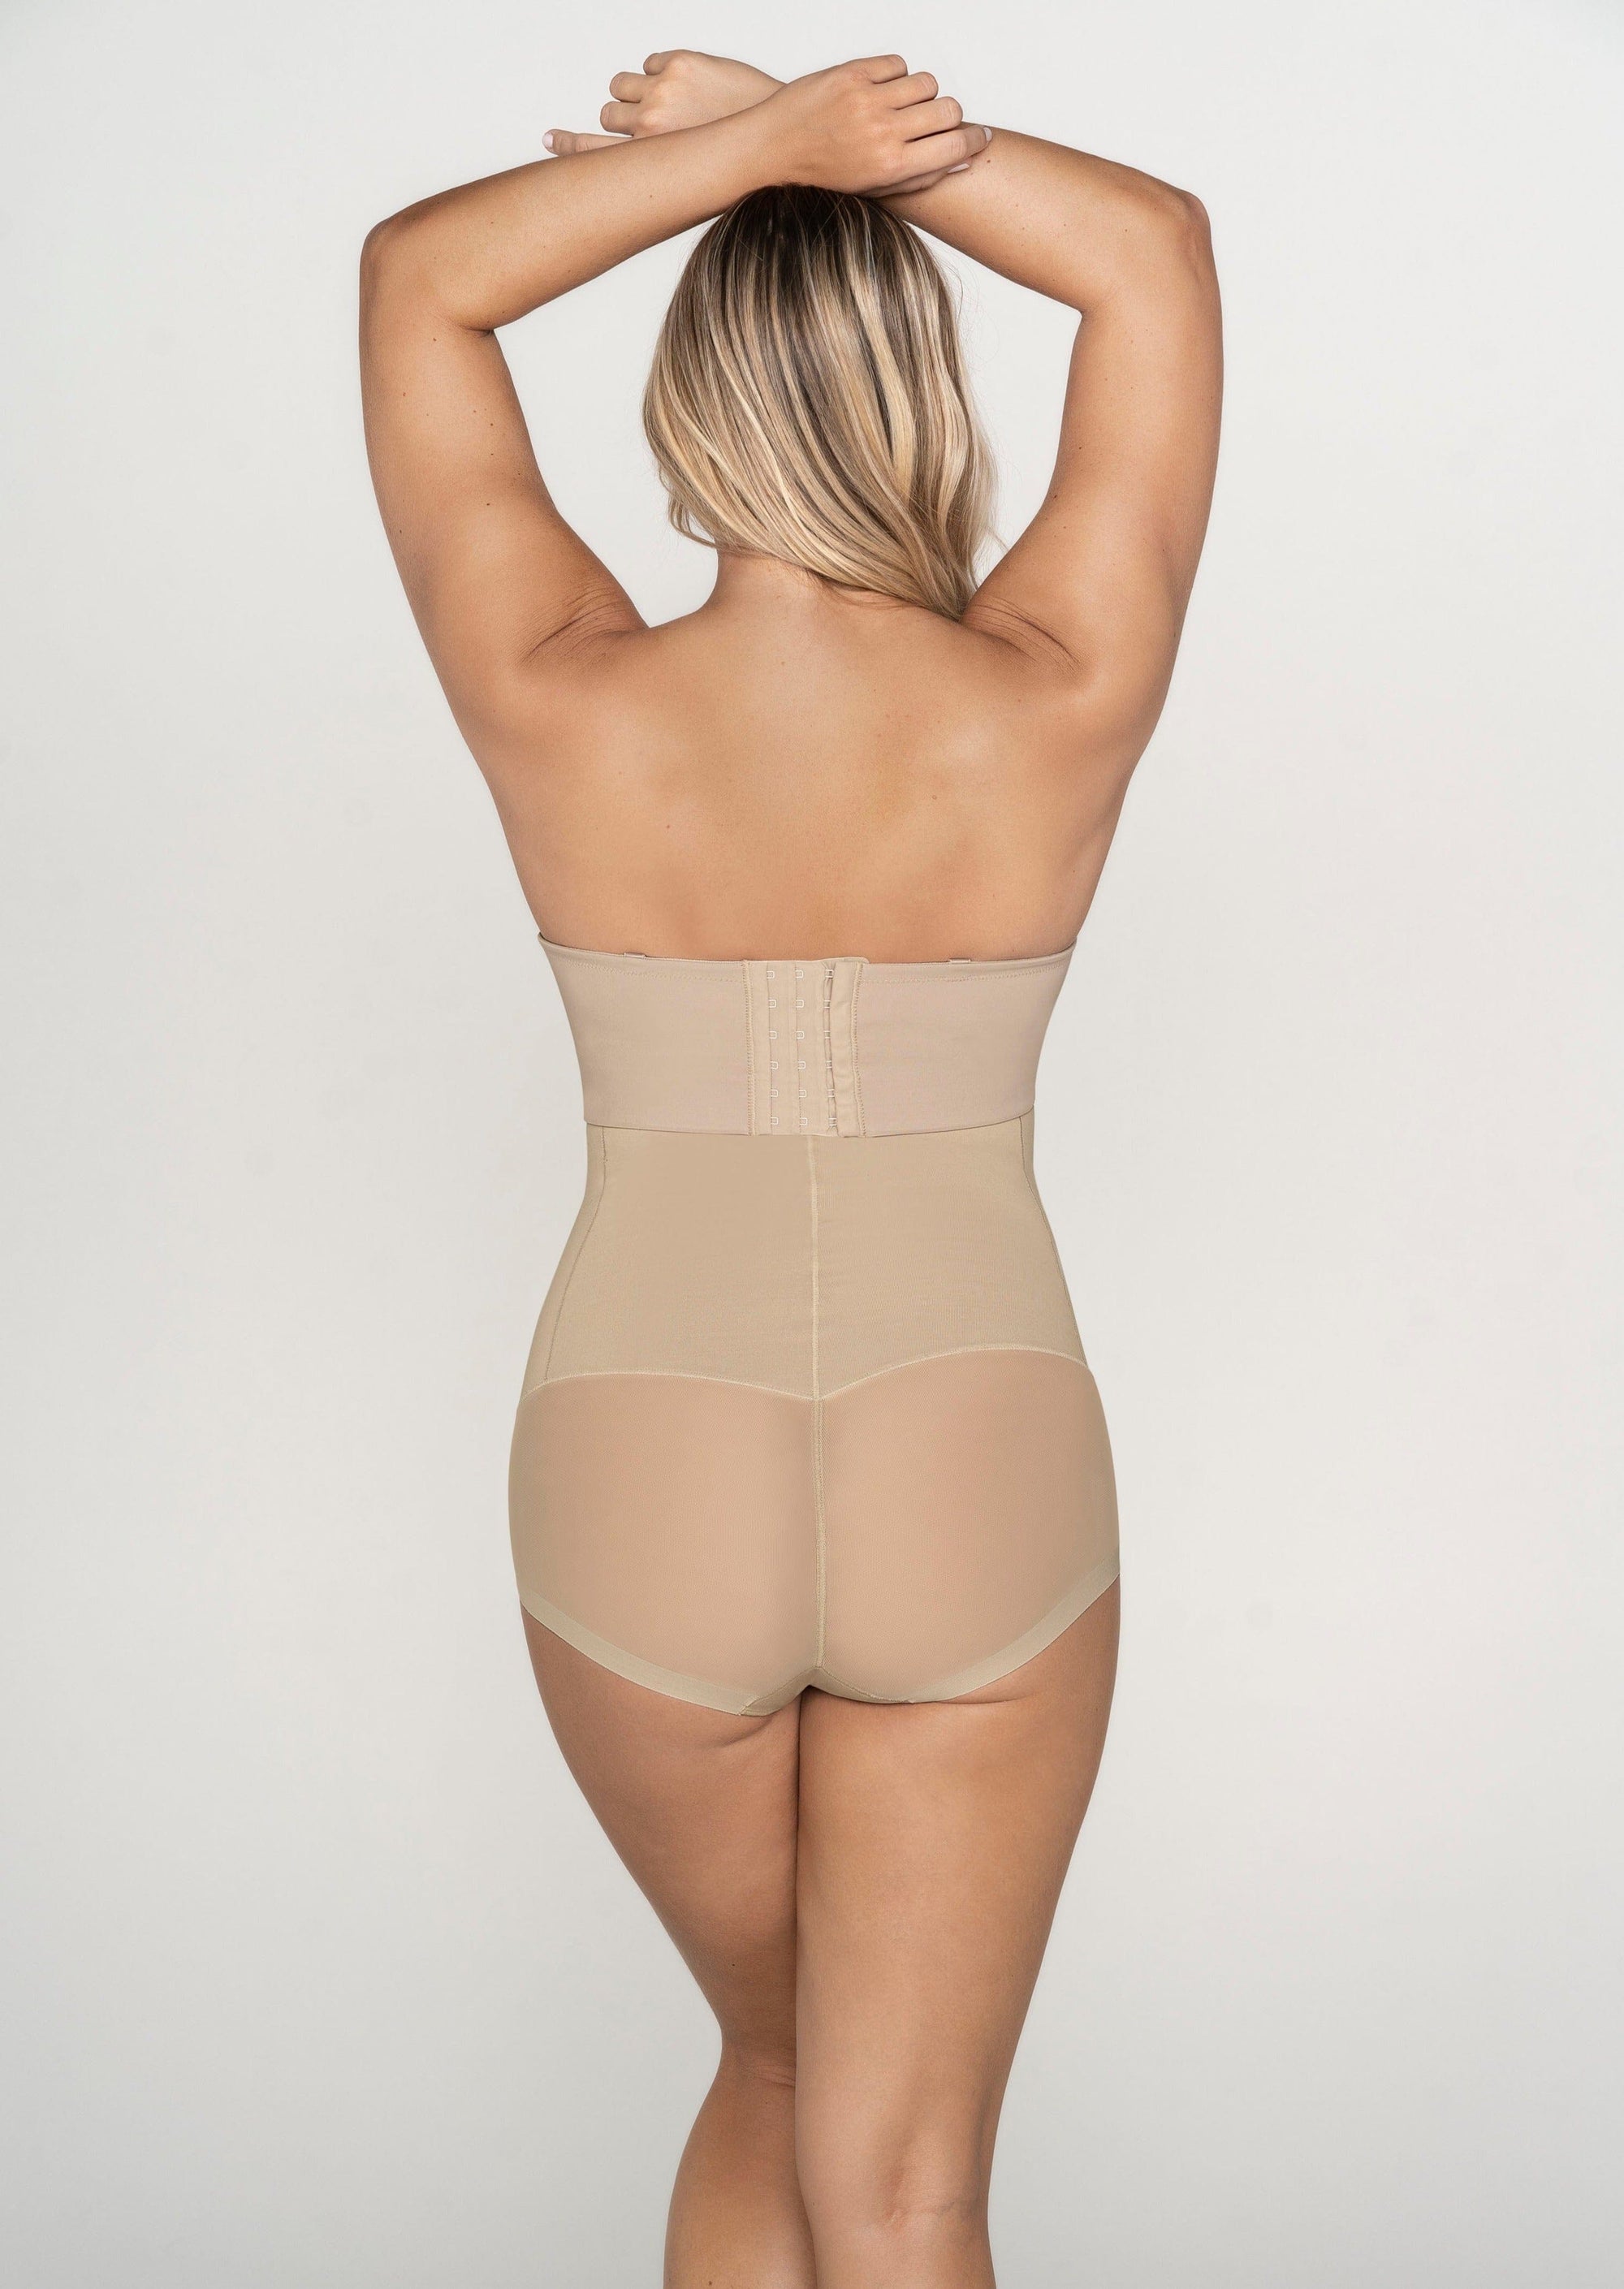 Leonisa Lingerie Tagged Compression - Chérie Amour